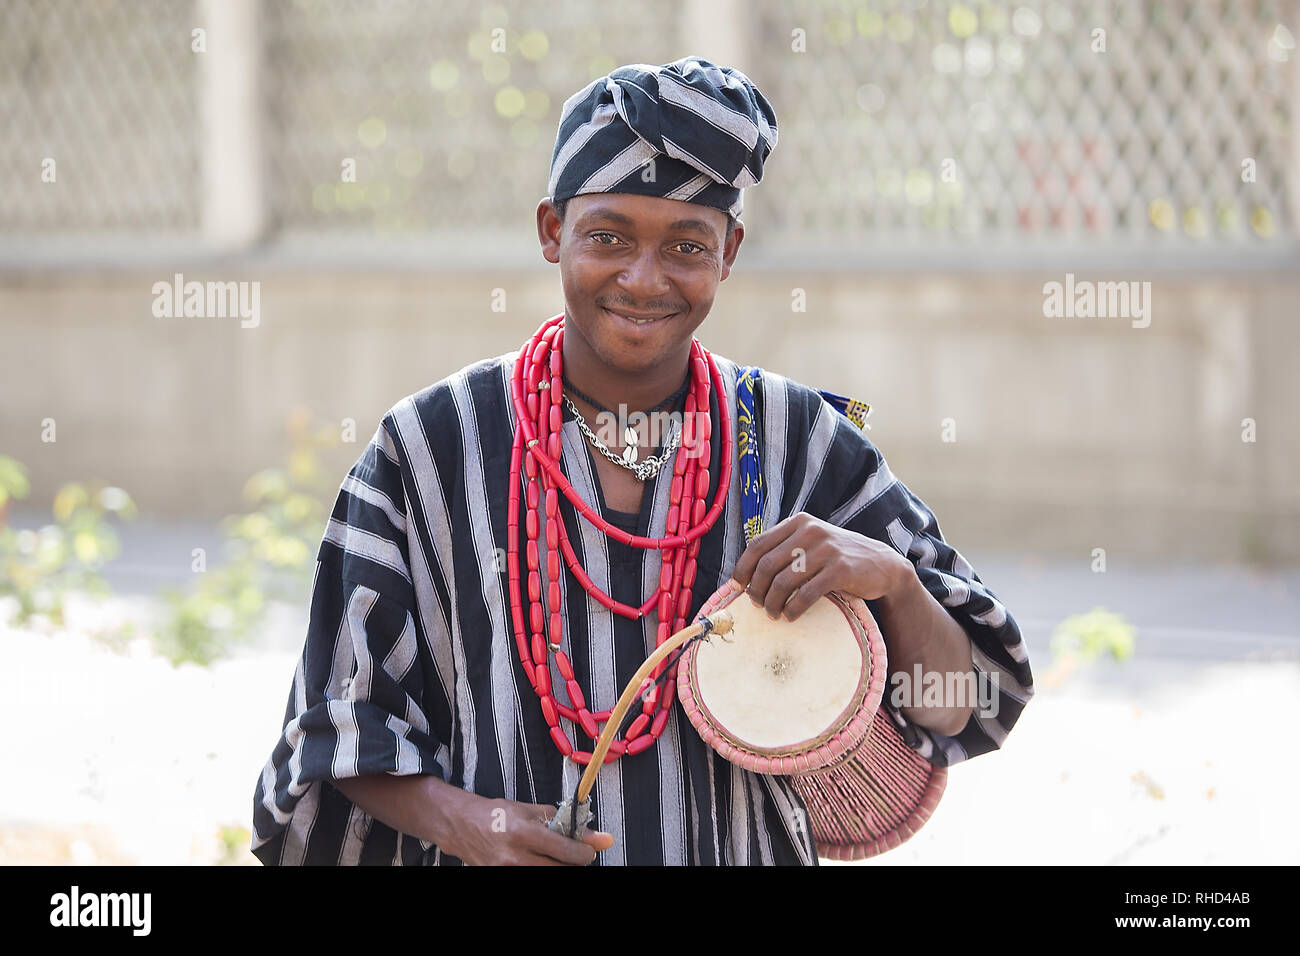 Gorizia, Italy - August 27, 2017: Musician of Benin traditional dance company in the town street during the International Folklore festival Stock Photo